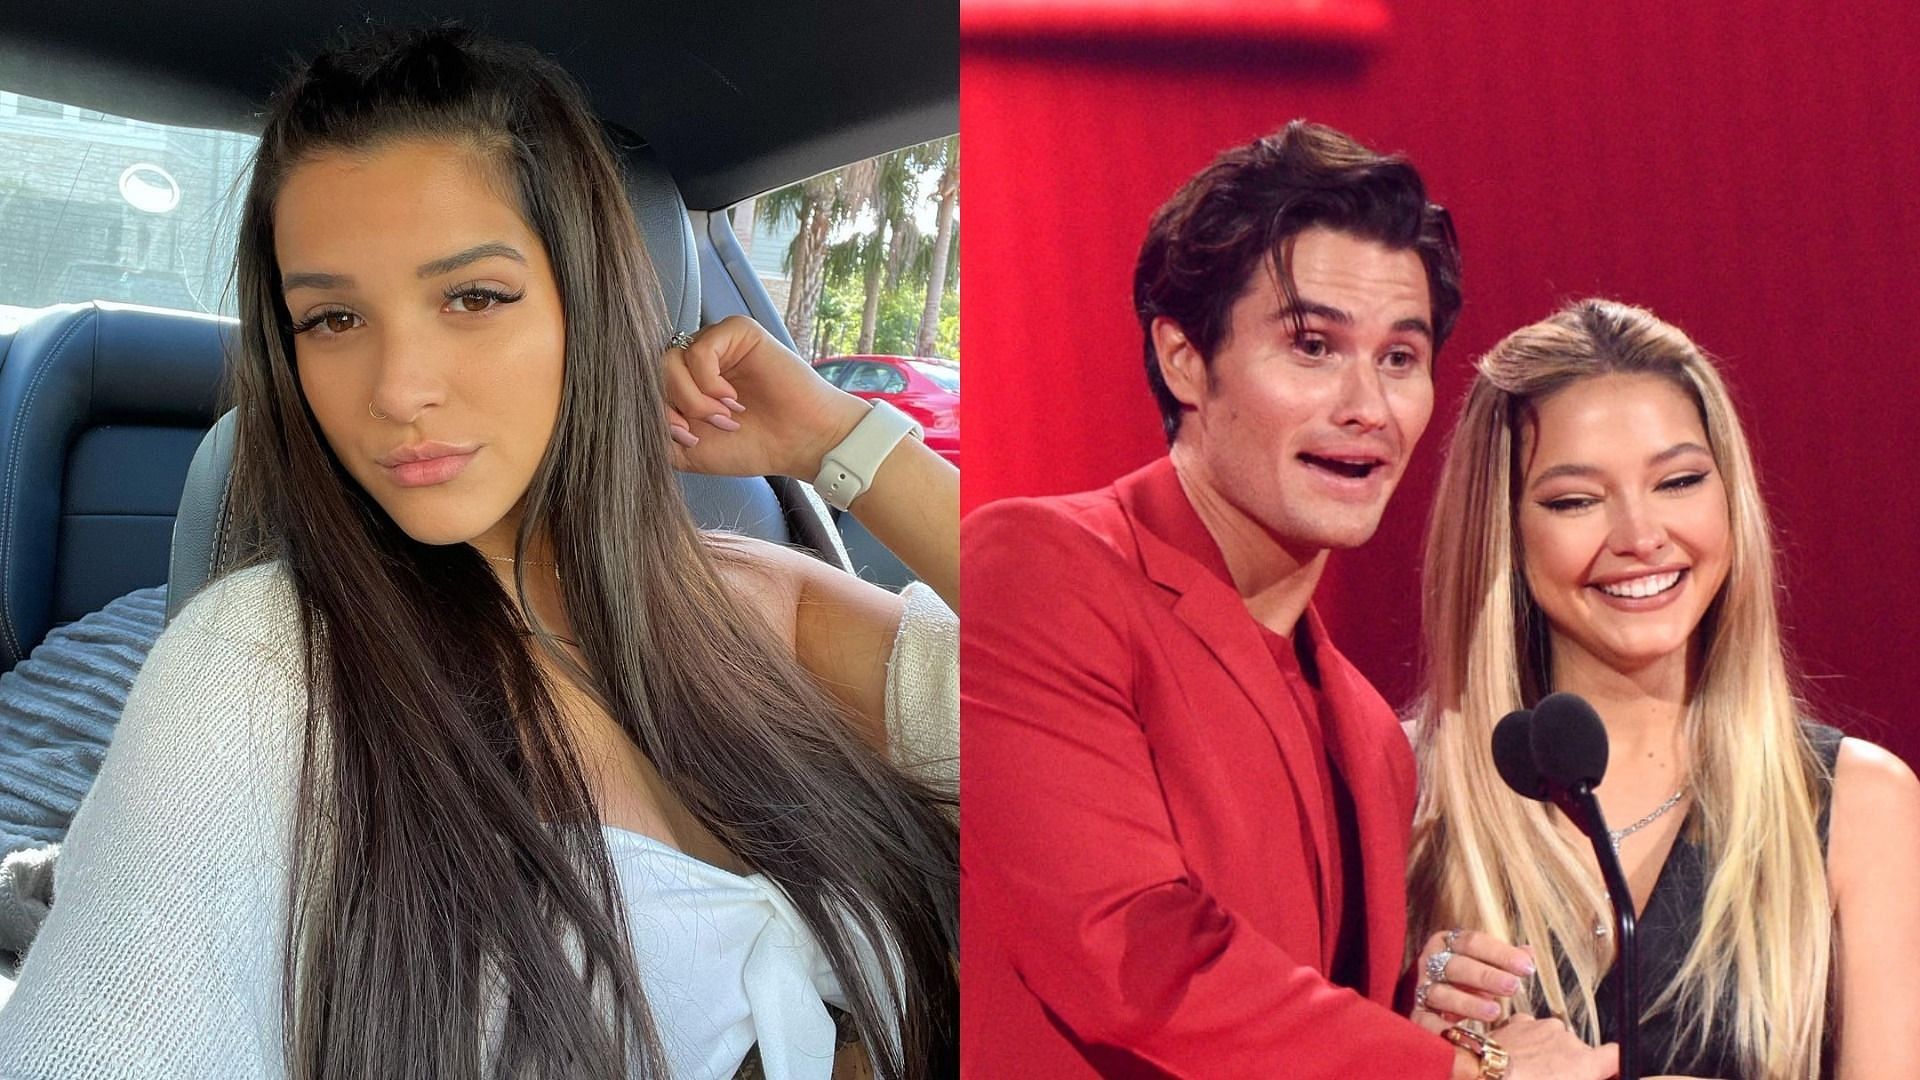 Val Bragg was the mystery woman spotted with Chase Stokes following his split with Madelyn Cline (Image via Val Bragg/Instagram and Kevin Mazur/Getty Images)